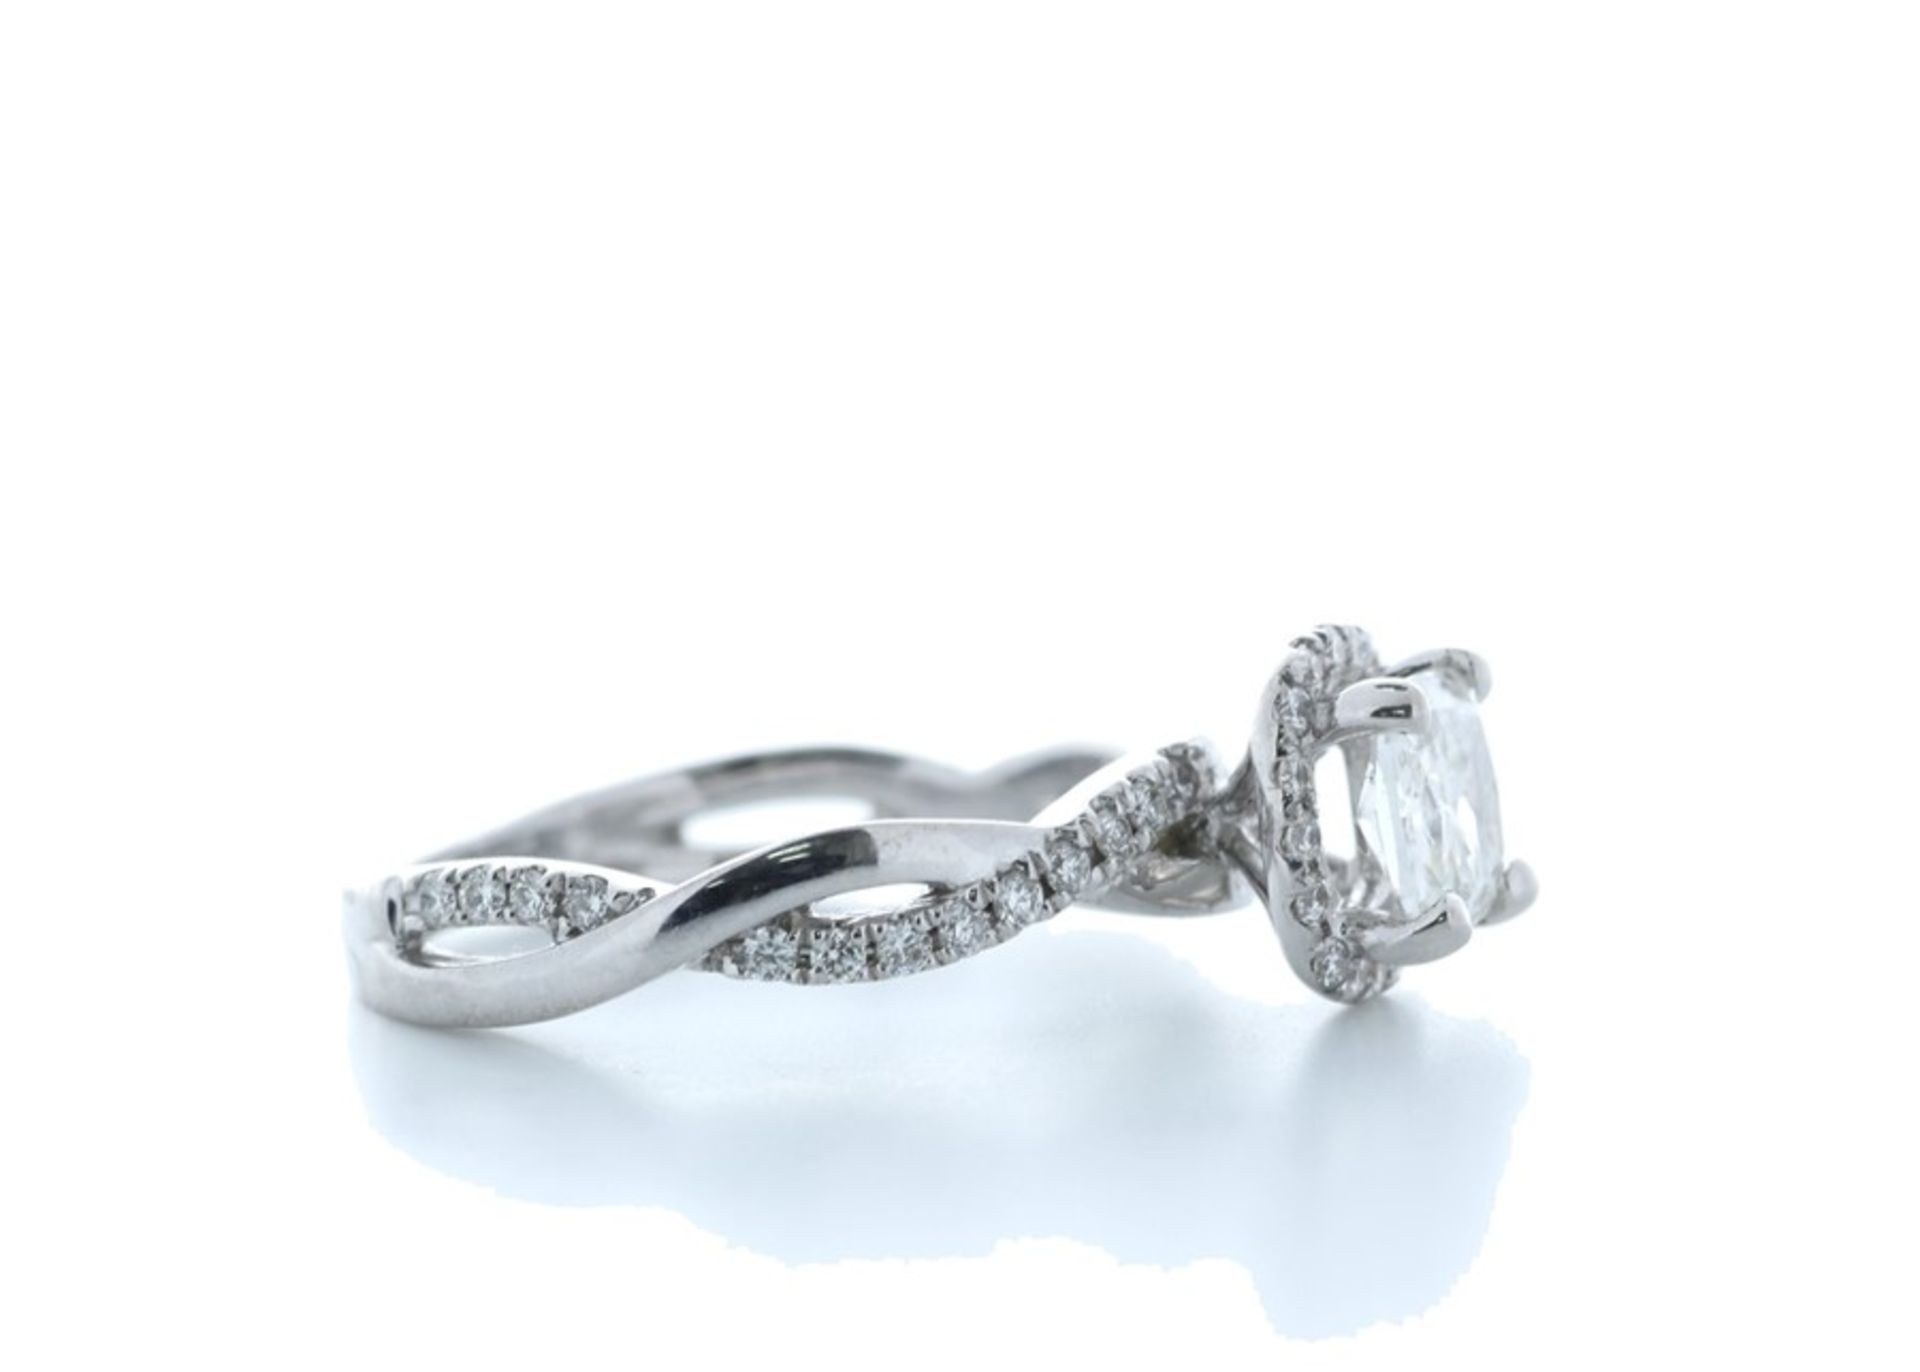 18ct White Gold Cushion Cut Diamond Ring 1.03 (0.71) Carats - Valued by IDI £10,500.00 - Image 4 of 5